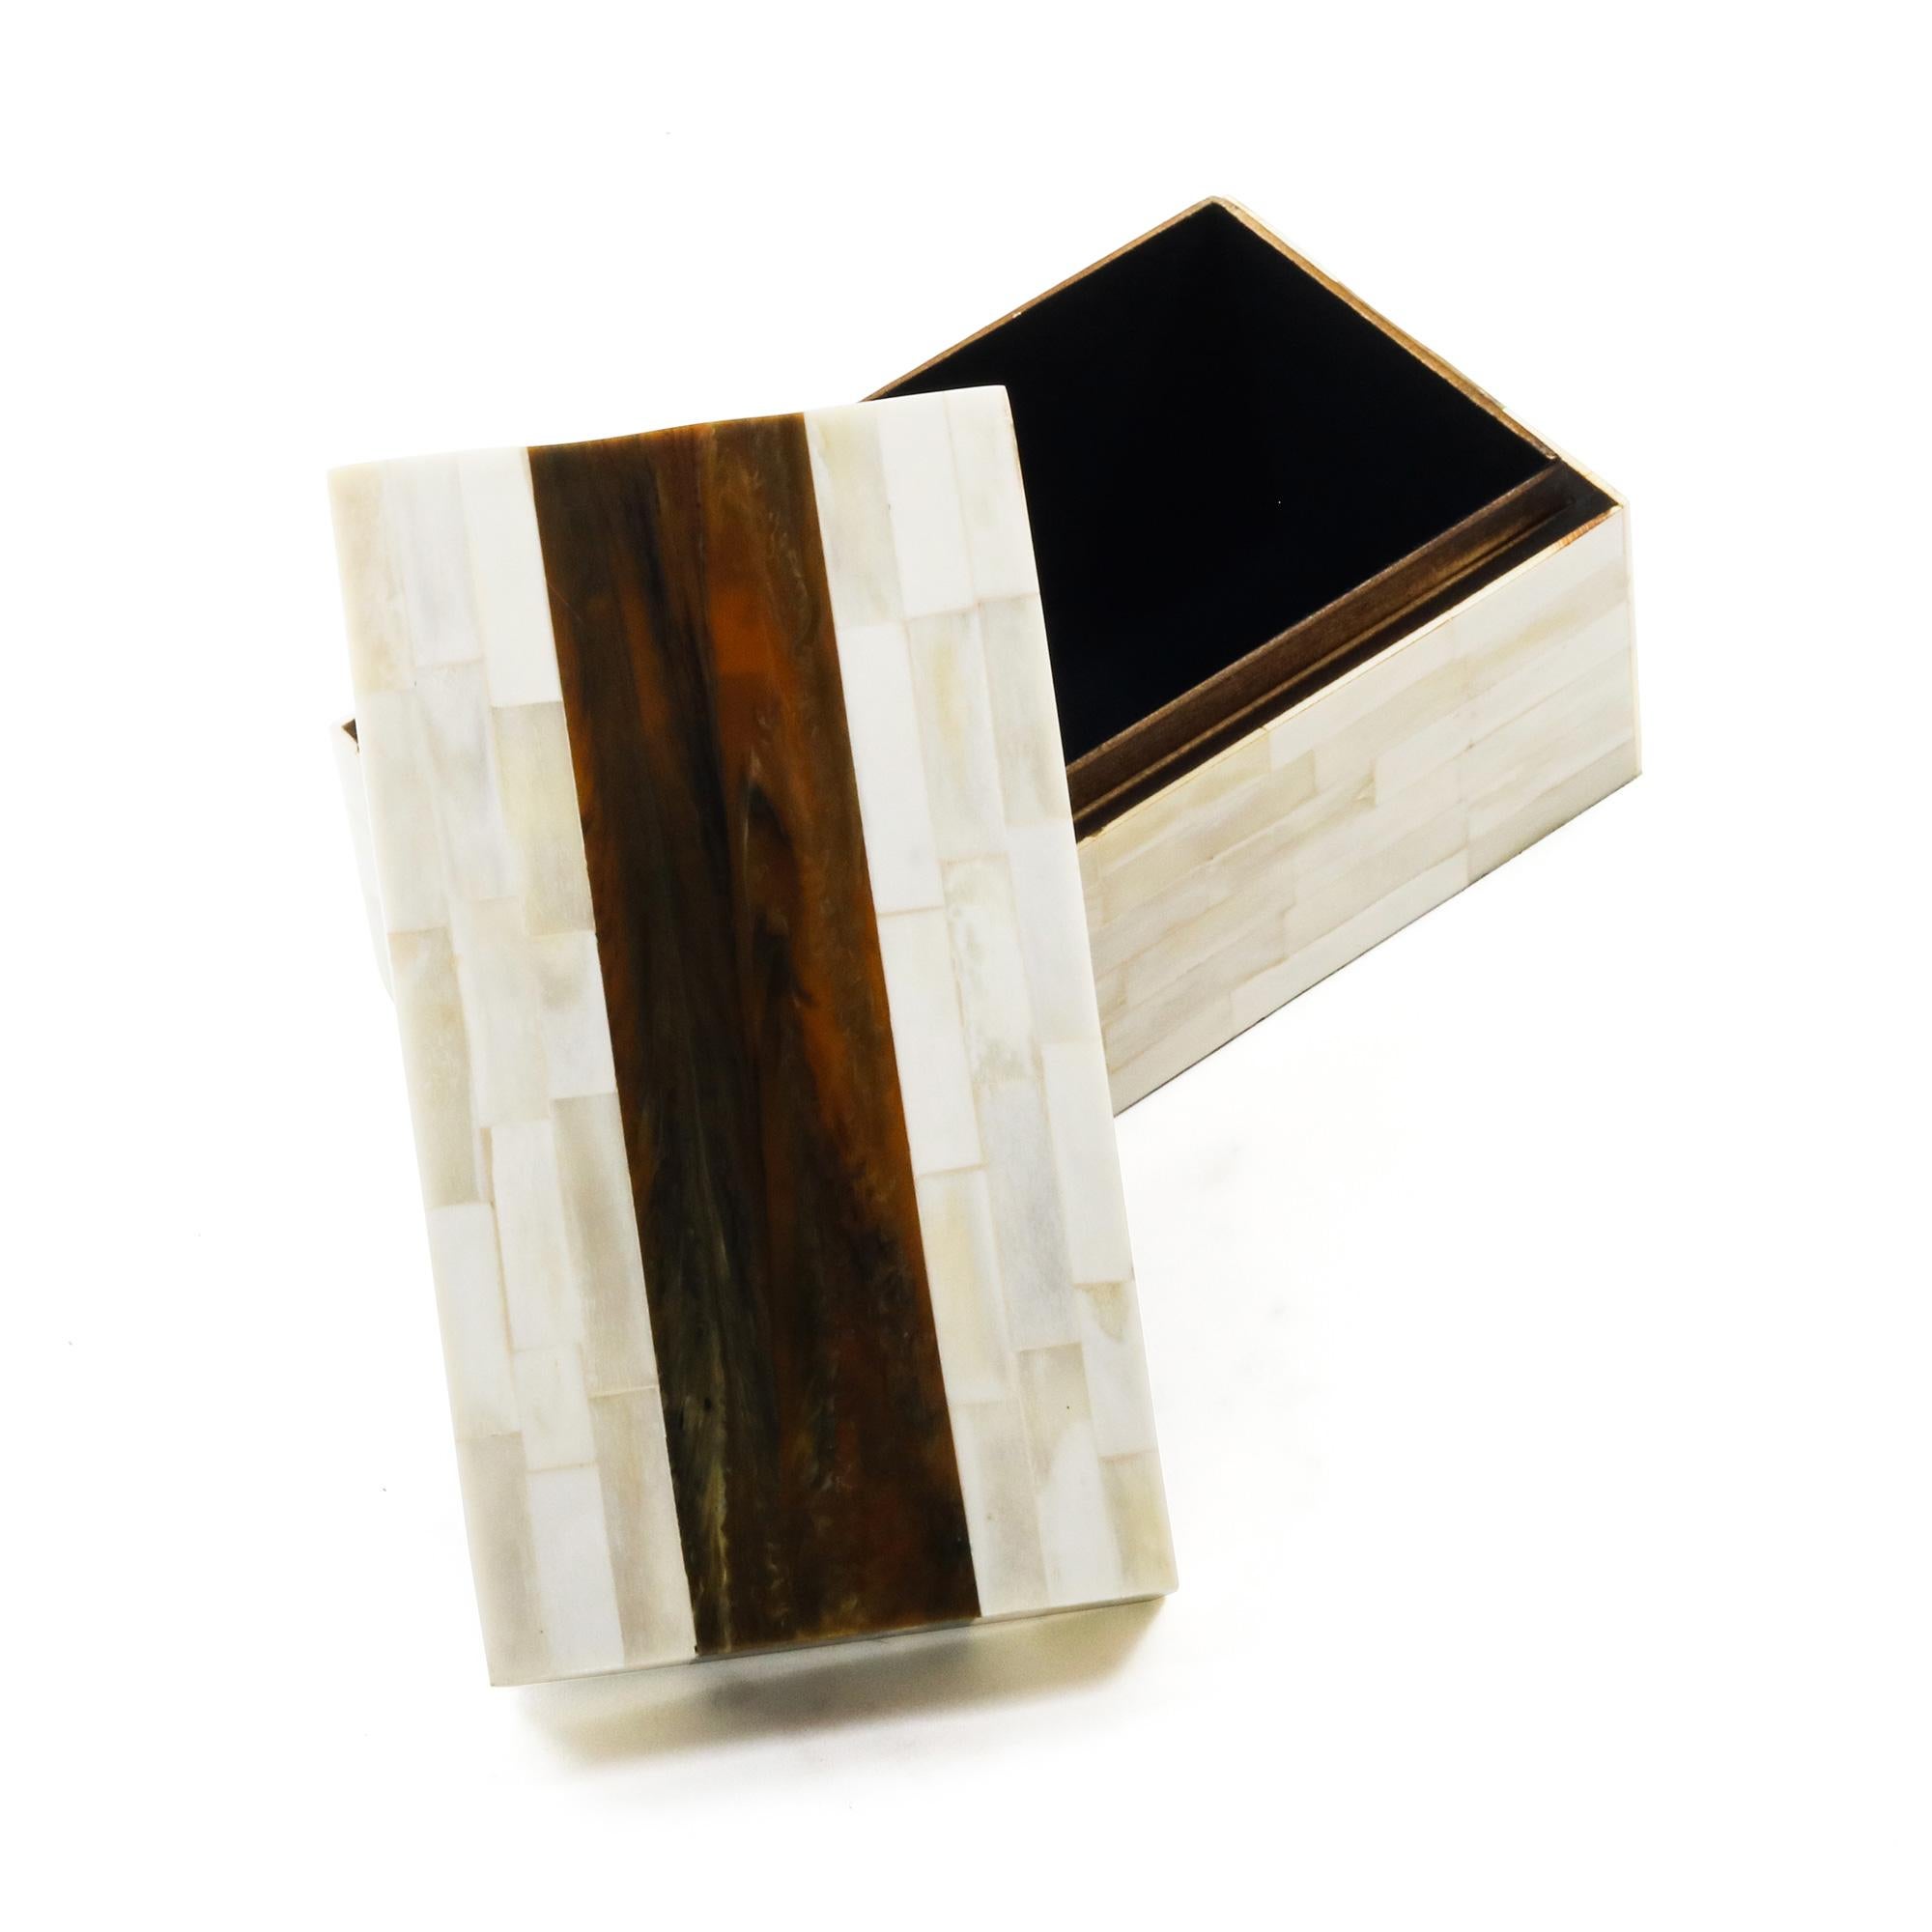 An ivory and brown decorative bone box featuring a contrasting stripe across the center and top.